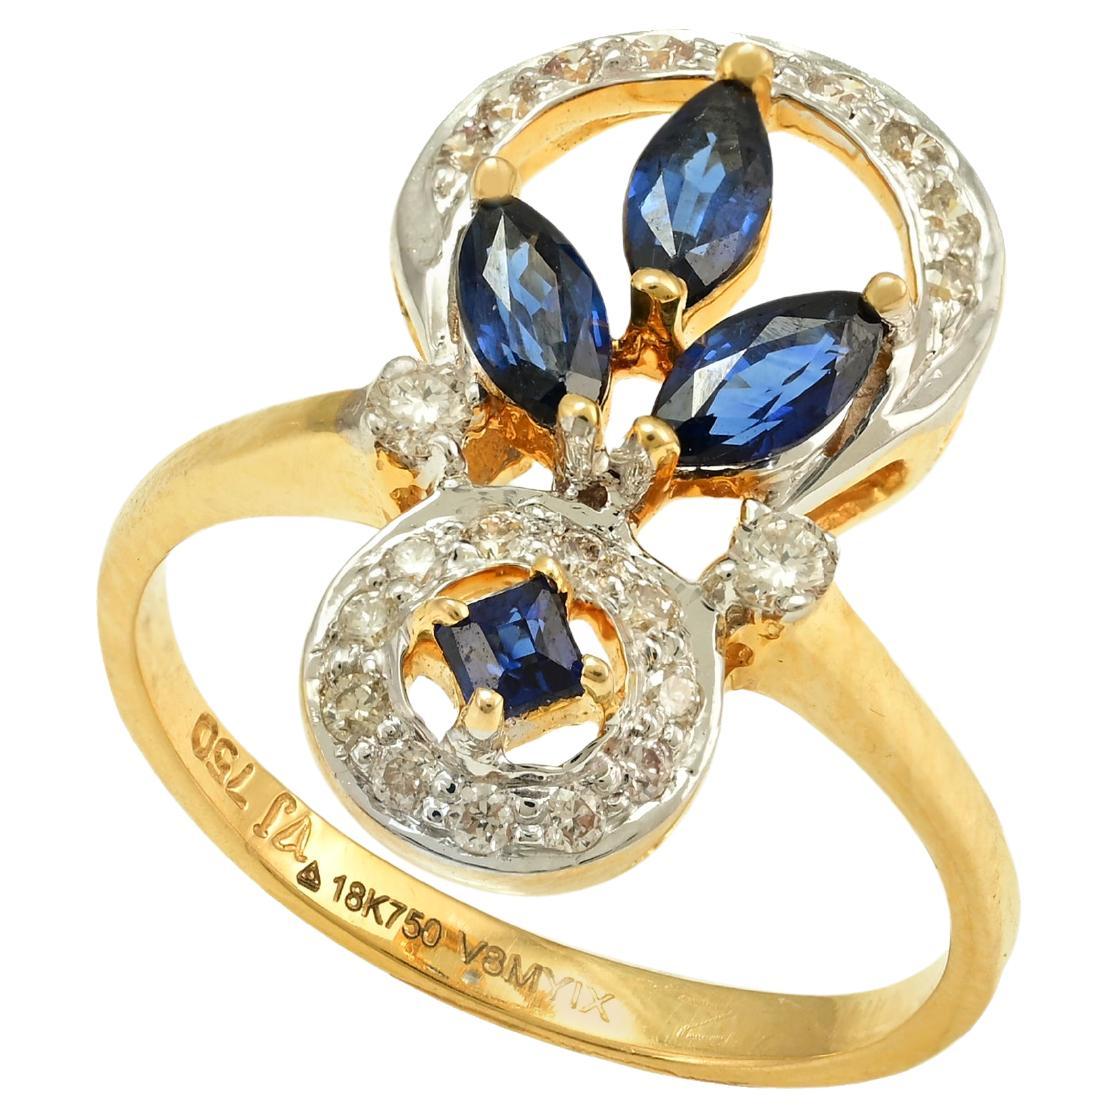 For Sale:  18k Solid Yellow Gold Contemporary Diamond and Blue Sapphire Statement Ring